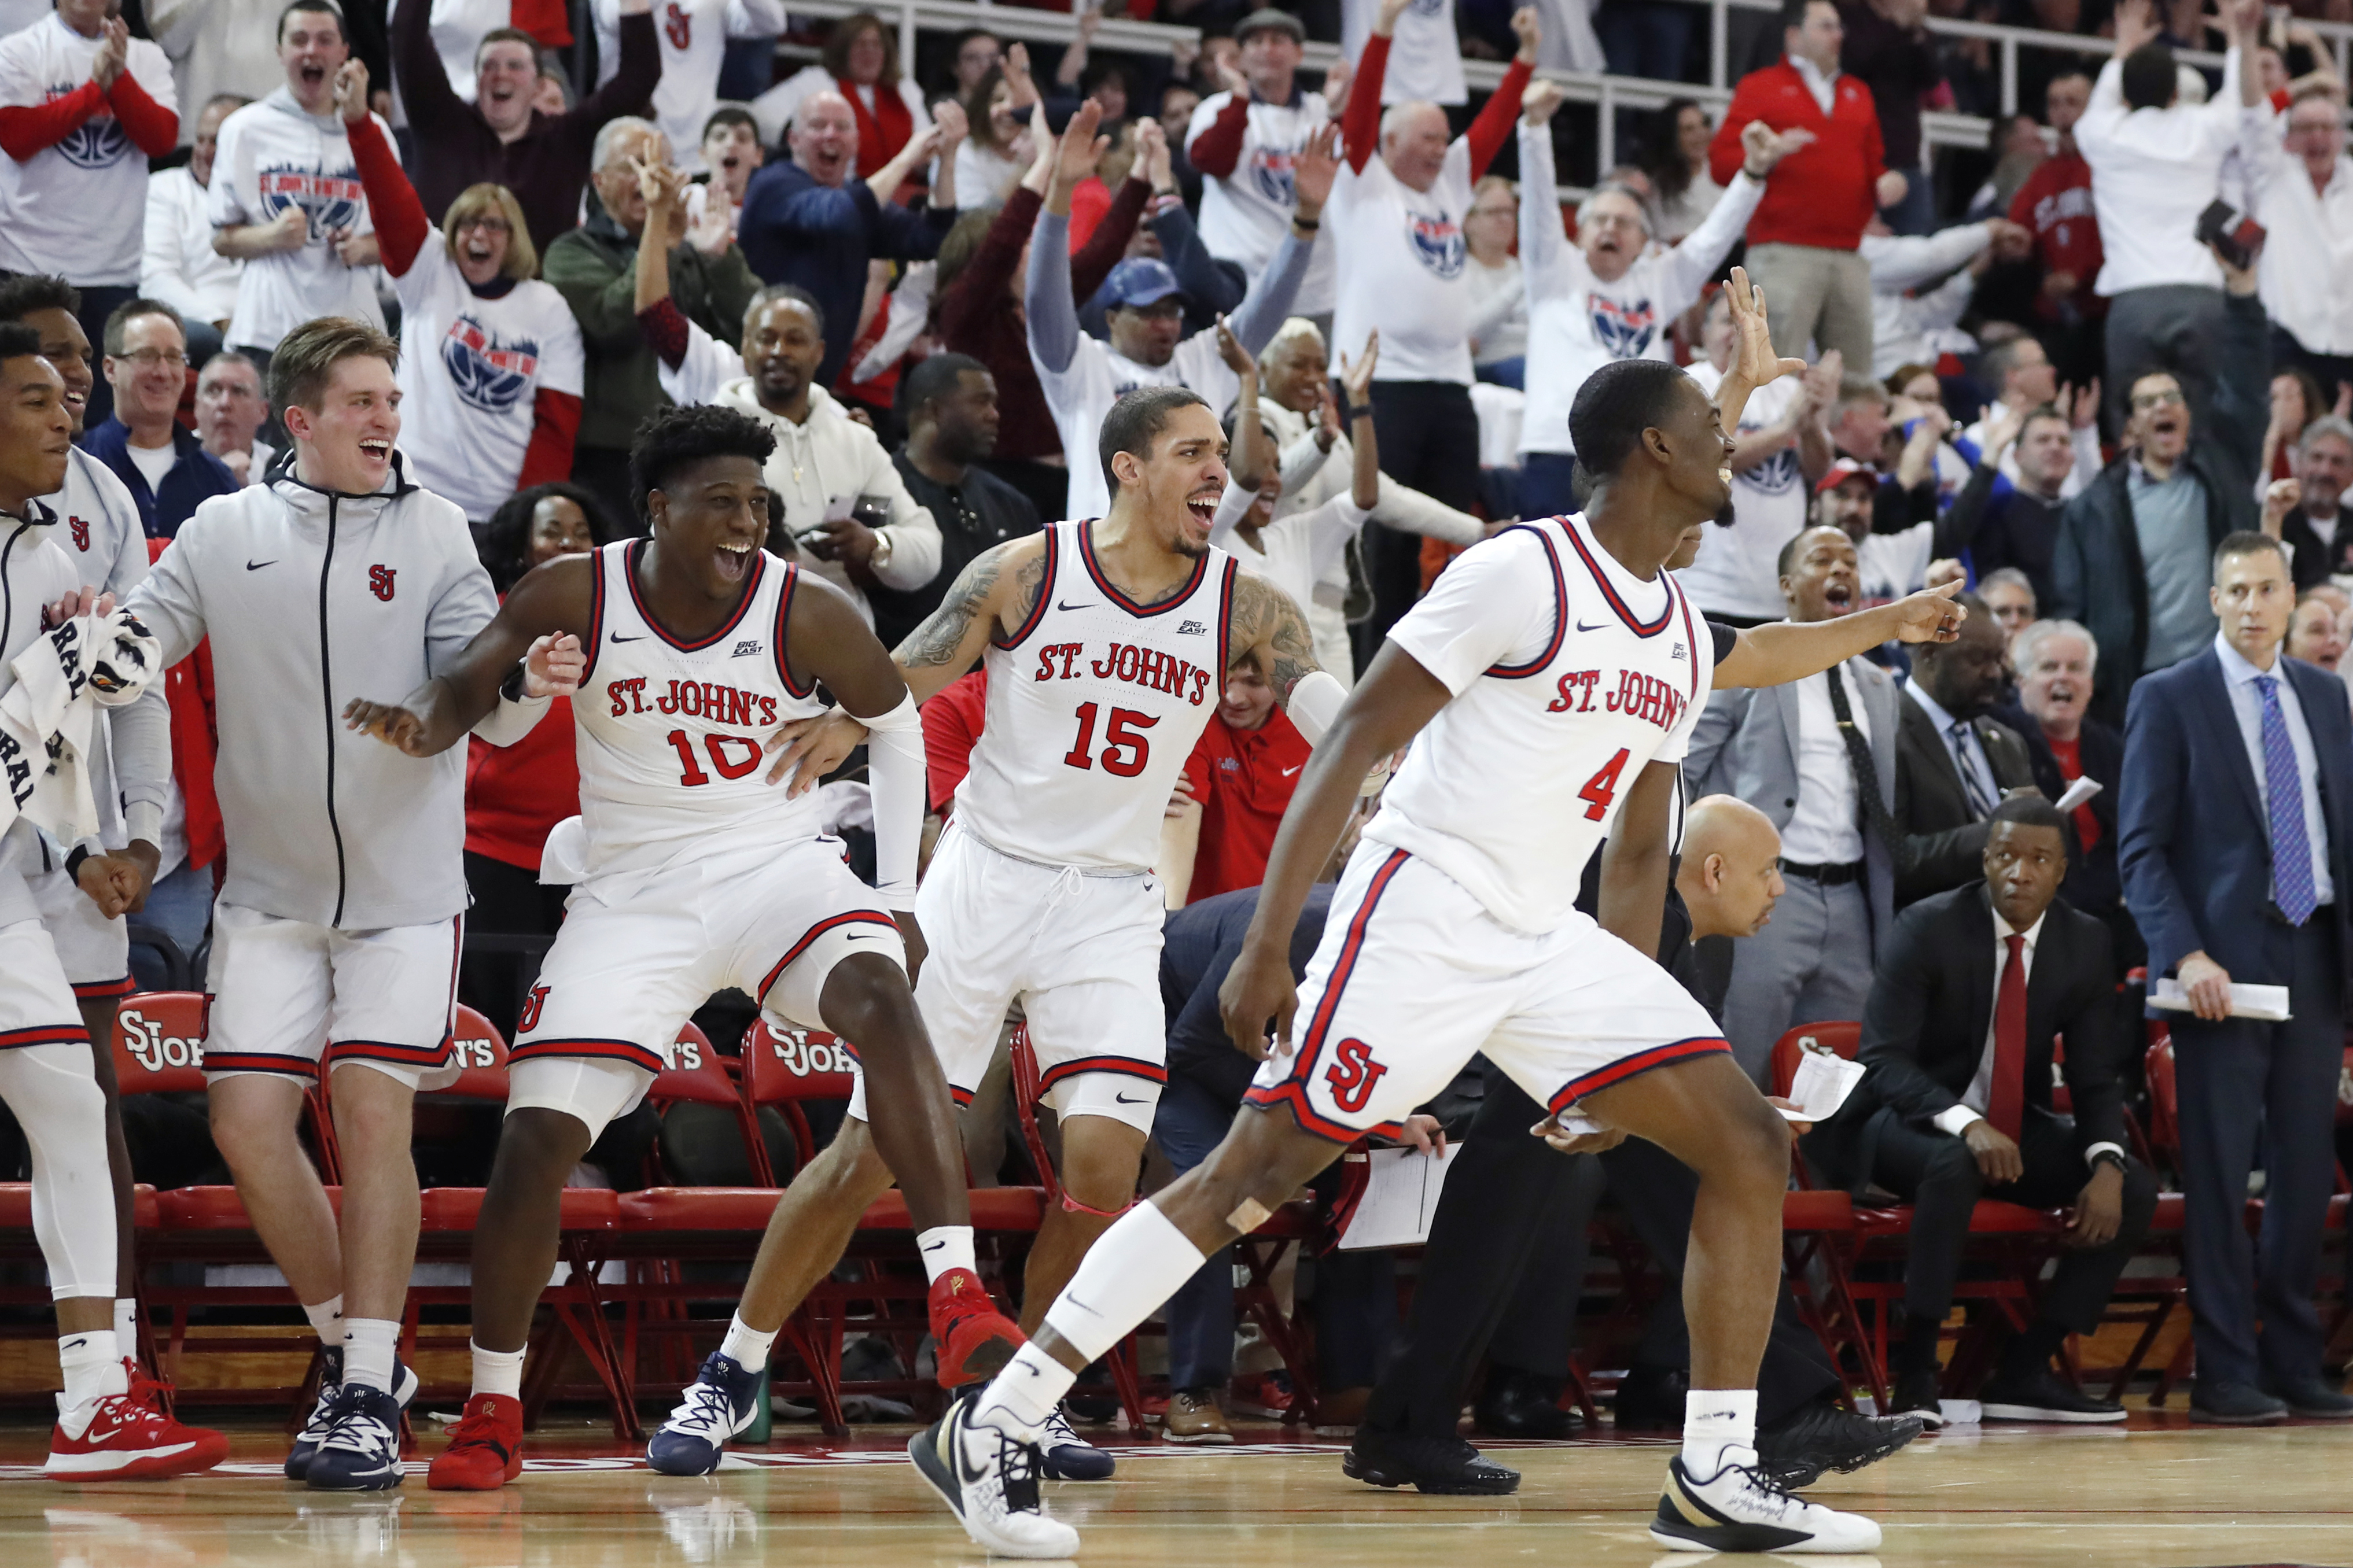 St. John's blows past No. 10 Creighton with 3-point barrage